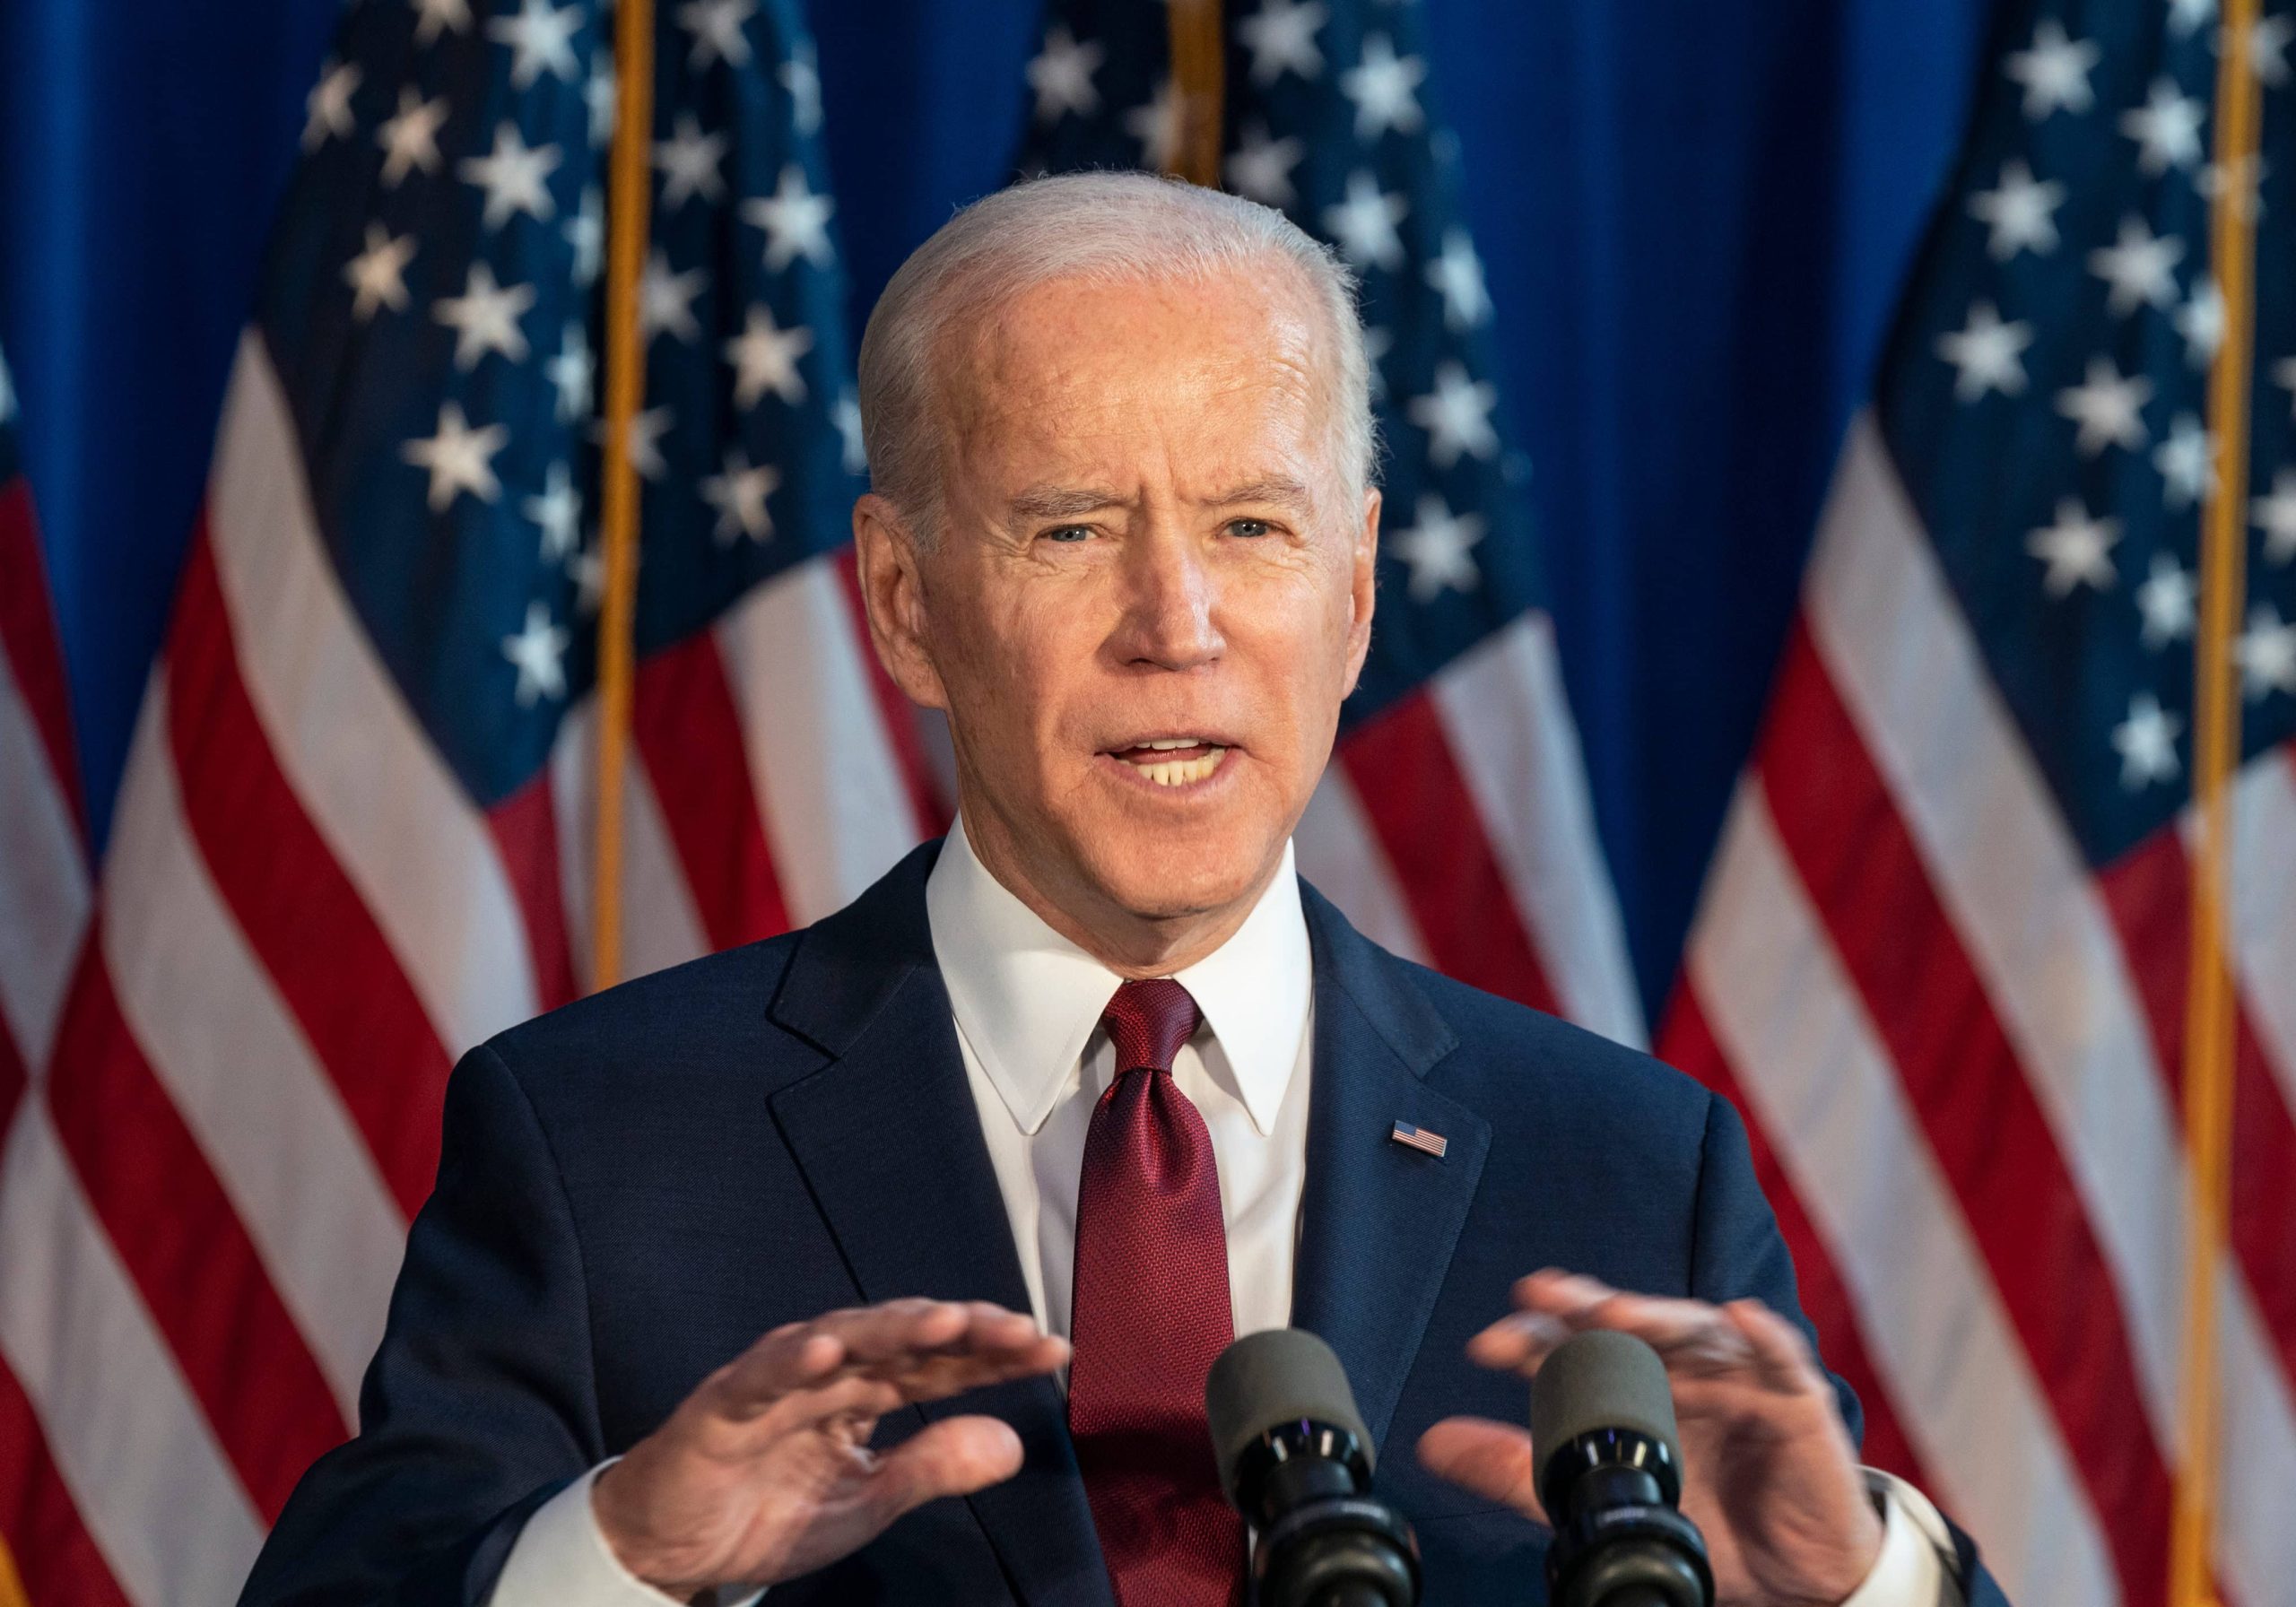 In Historic Move, Biden Announces He Will Pardon Thousands of Federal Cannabis Offenses